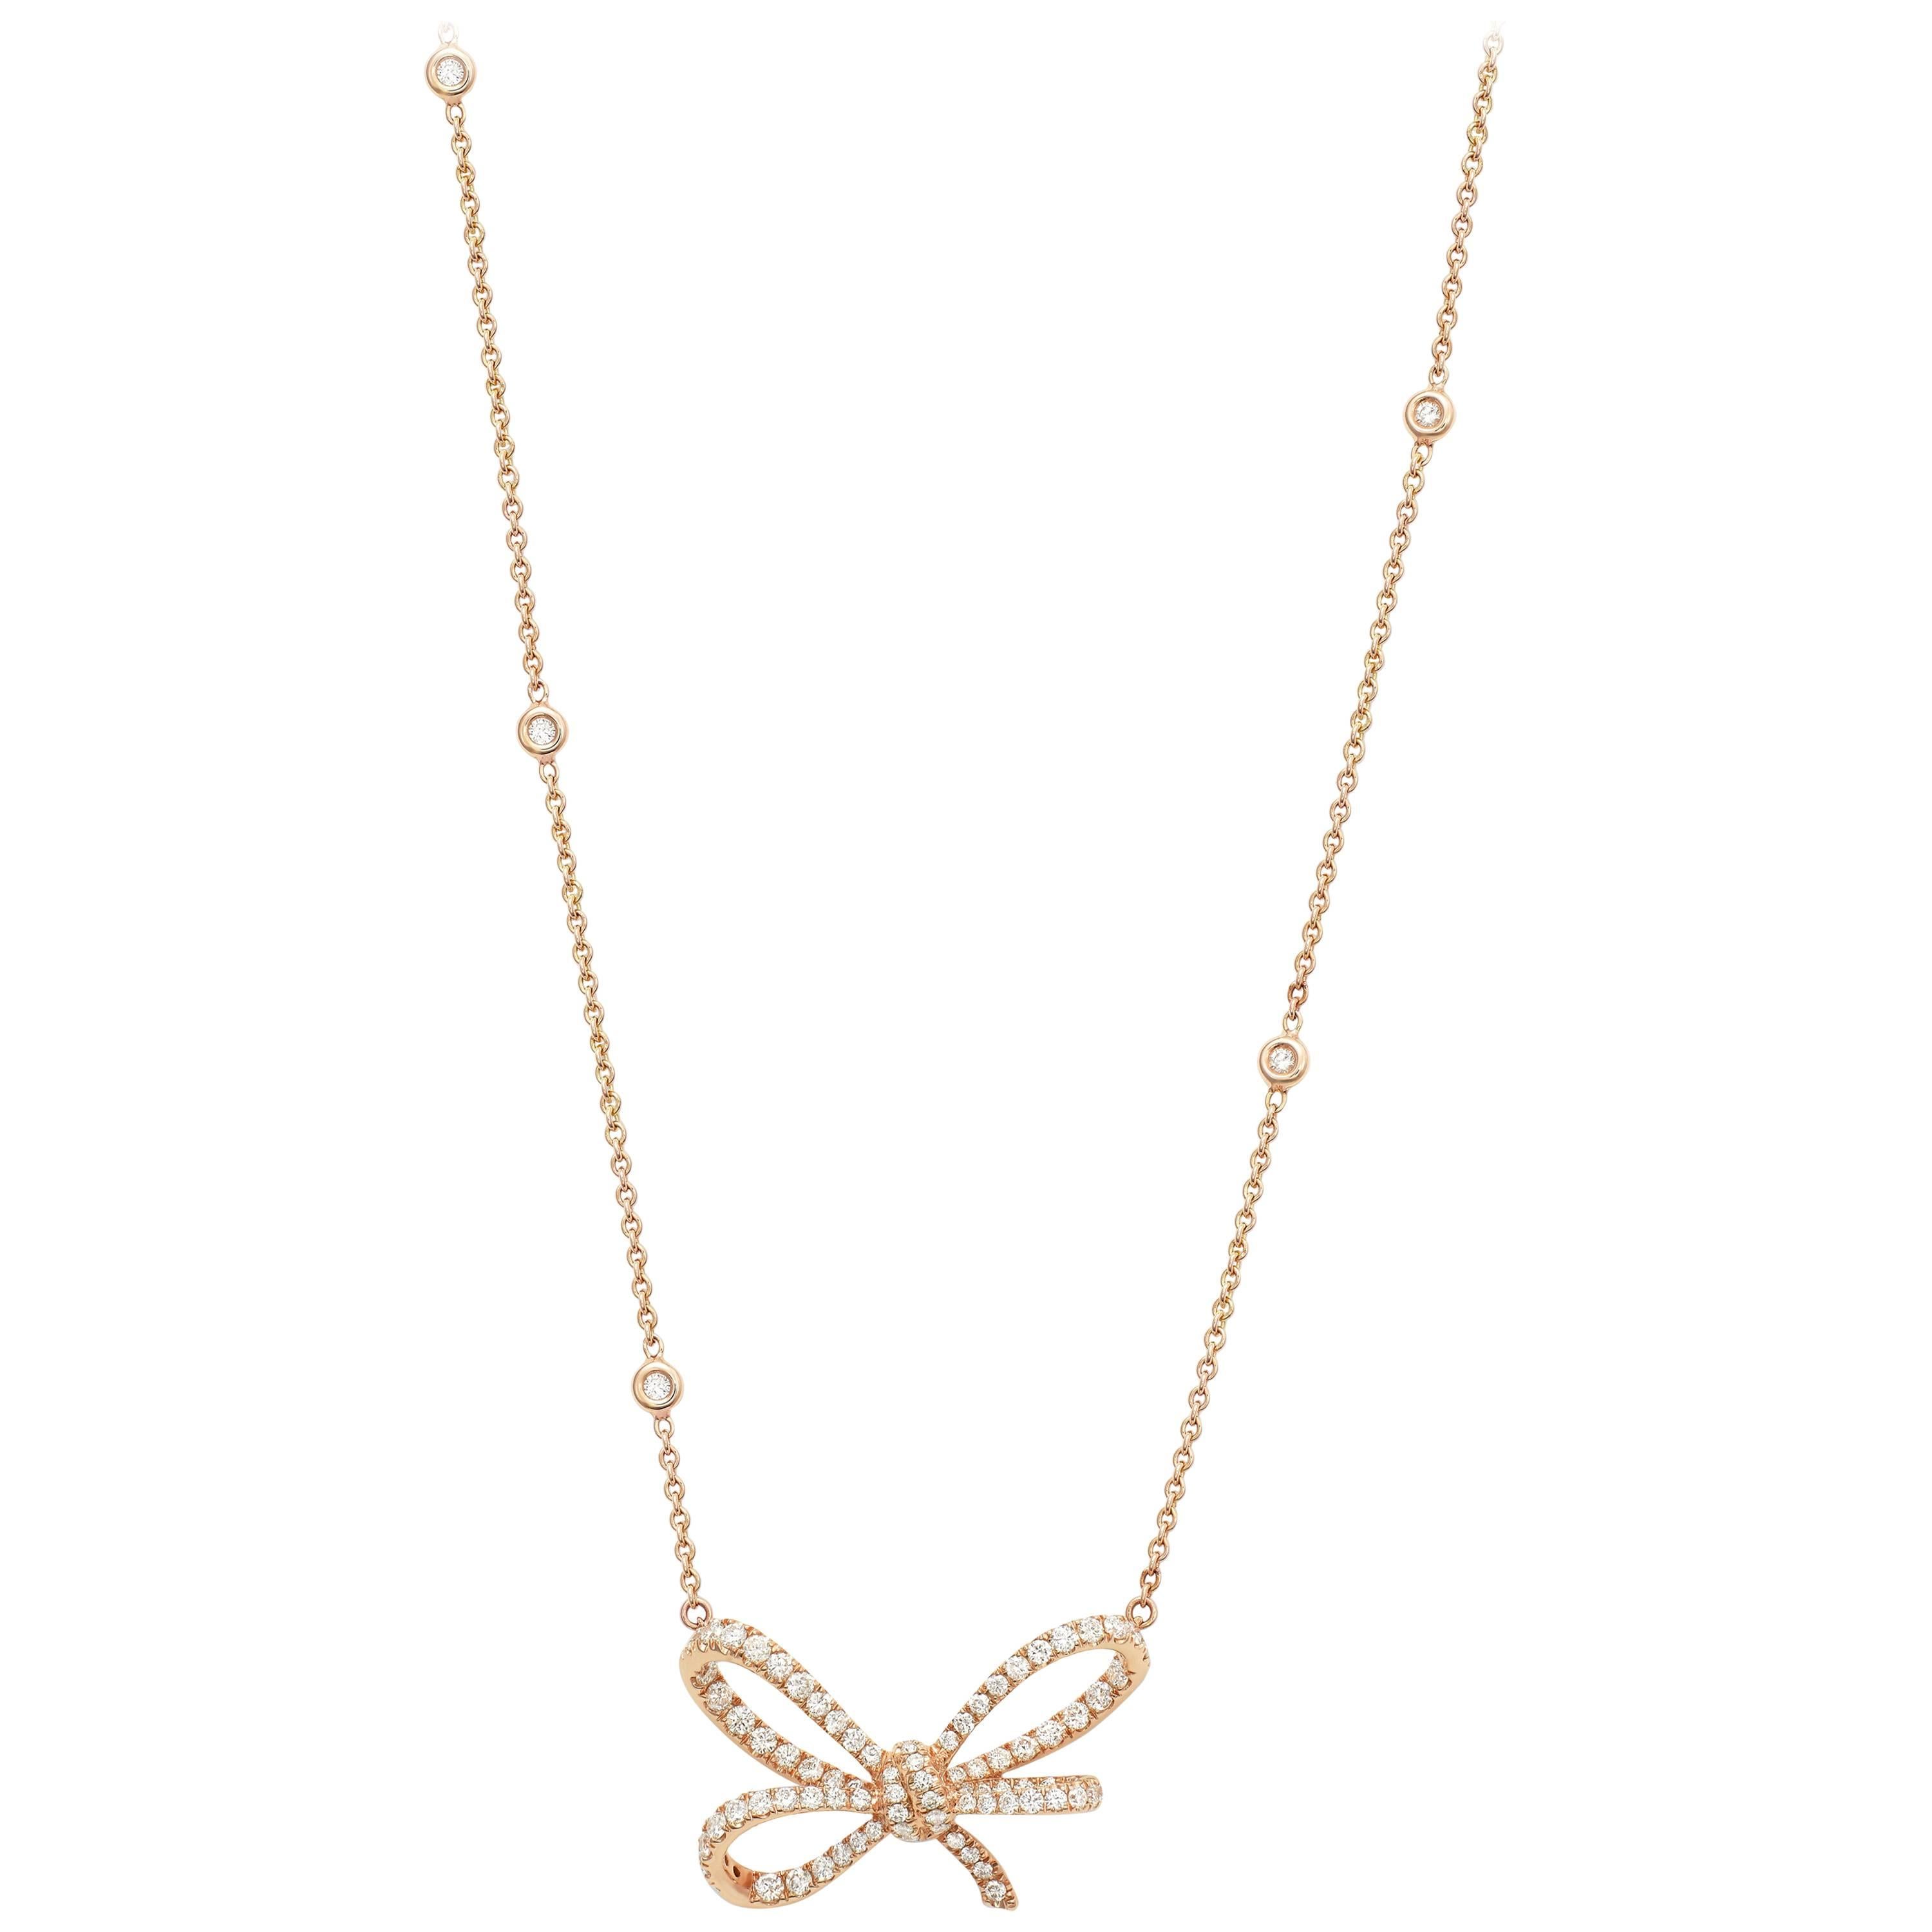 This beautiful necklace is part of Lyla’s Bow, the first collection designed by Vania Leles.
Embodying the spirit of VANLELES’ design, this collection is feminine and timeless, a must have for jewellery lovers, and the perfect gift for someone